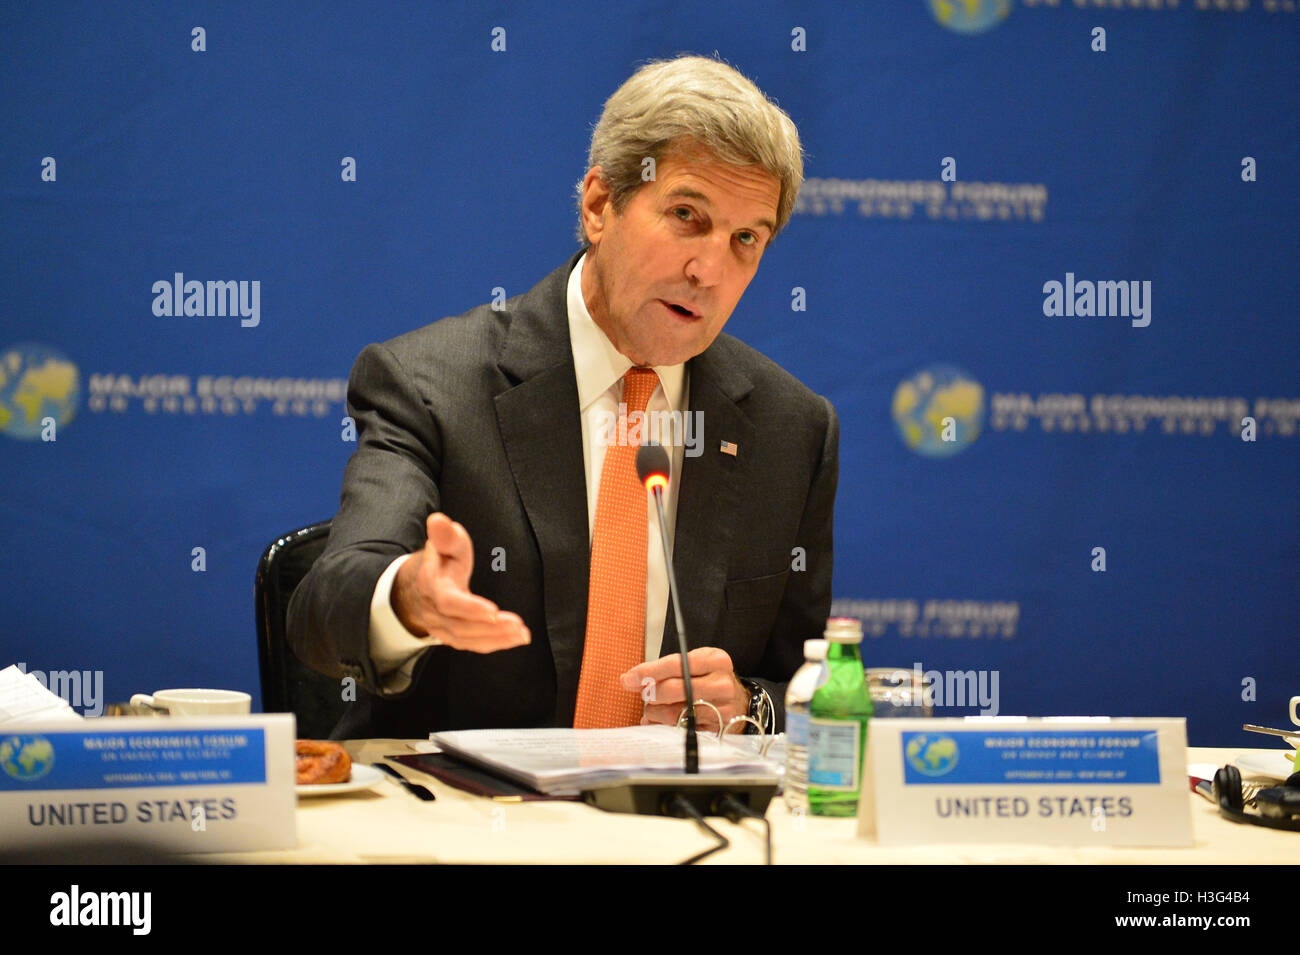 U.S. Secretary of State John Kerry participates in the Major Economies Forum, at the Marriott New York East Side Hotel, in New York City, New York on September 23, 2016. Stock Photo